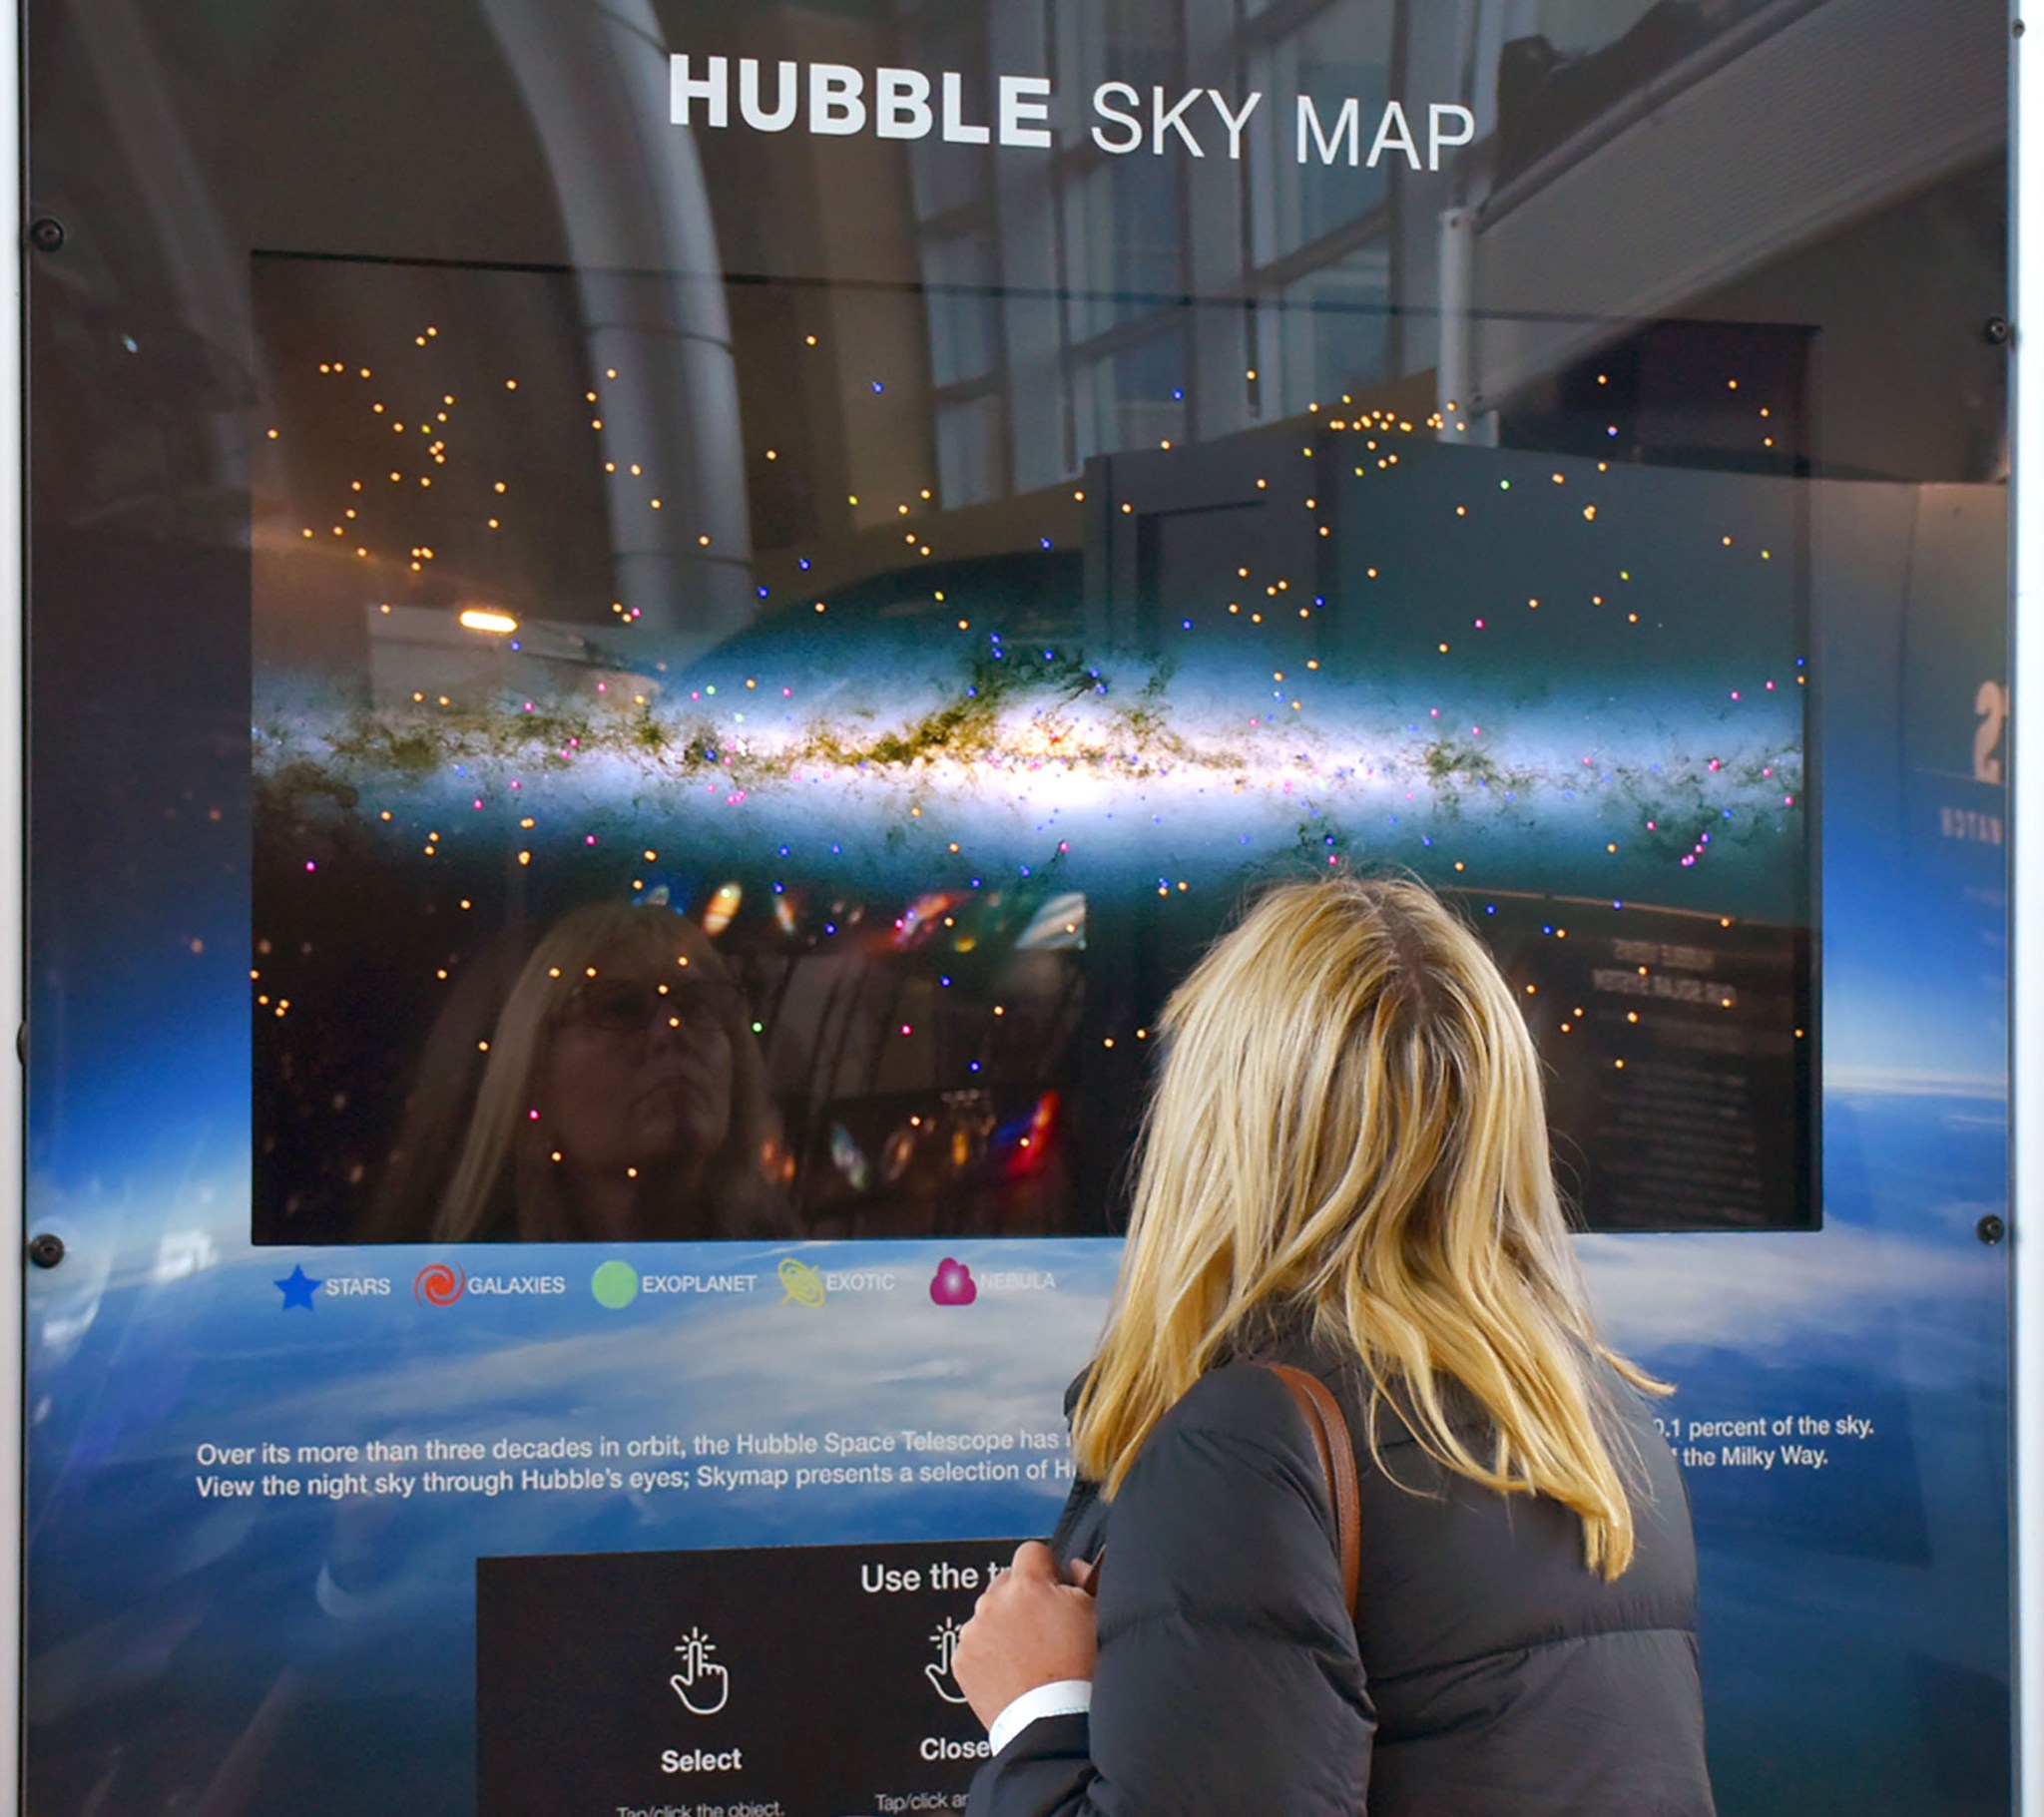 A women looking at a digital display of the Hubble Sky Map.